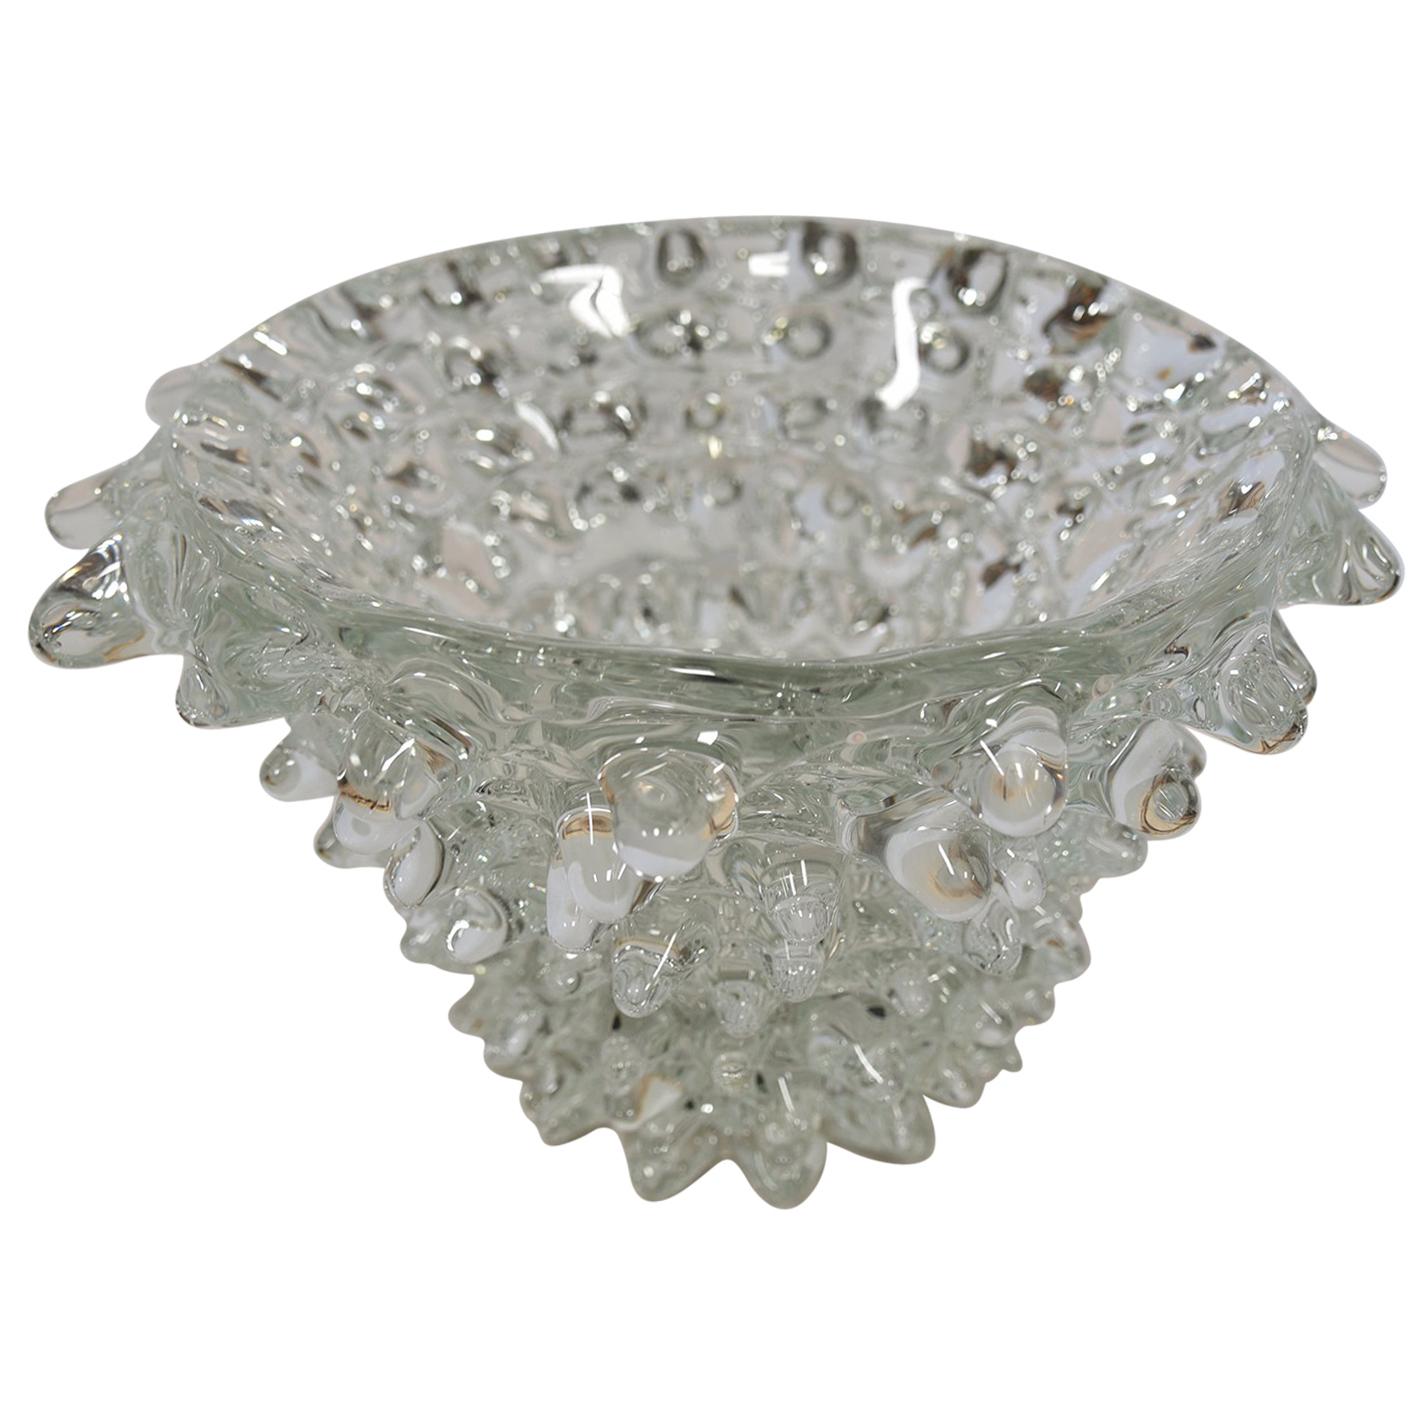 A unique decorative piece for your interior decor; a large clear sculpted Murano glass bowl DESIGNED BY BAROVIER & TOSO with interesting natural ROSTRATO pattern design. Reflecting light and luminosity within your space. Circa 1960. MWM DESIGN